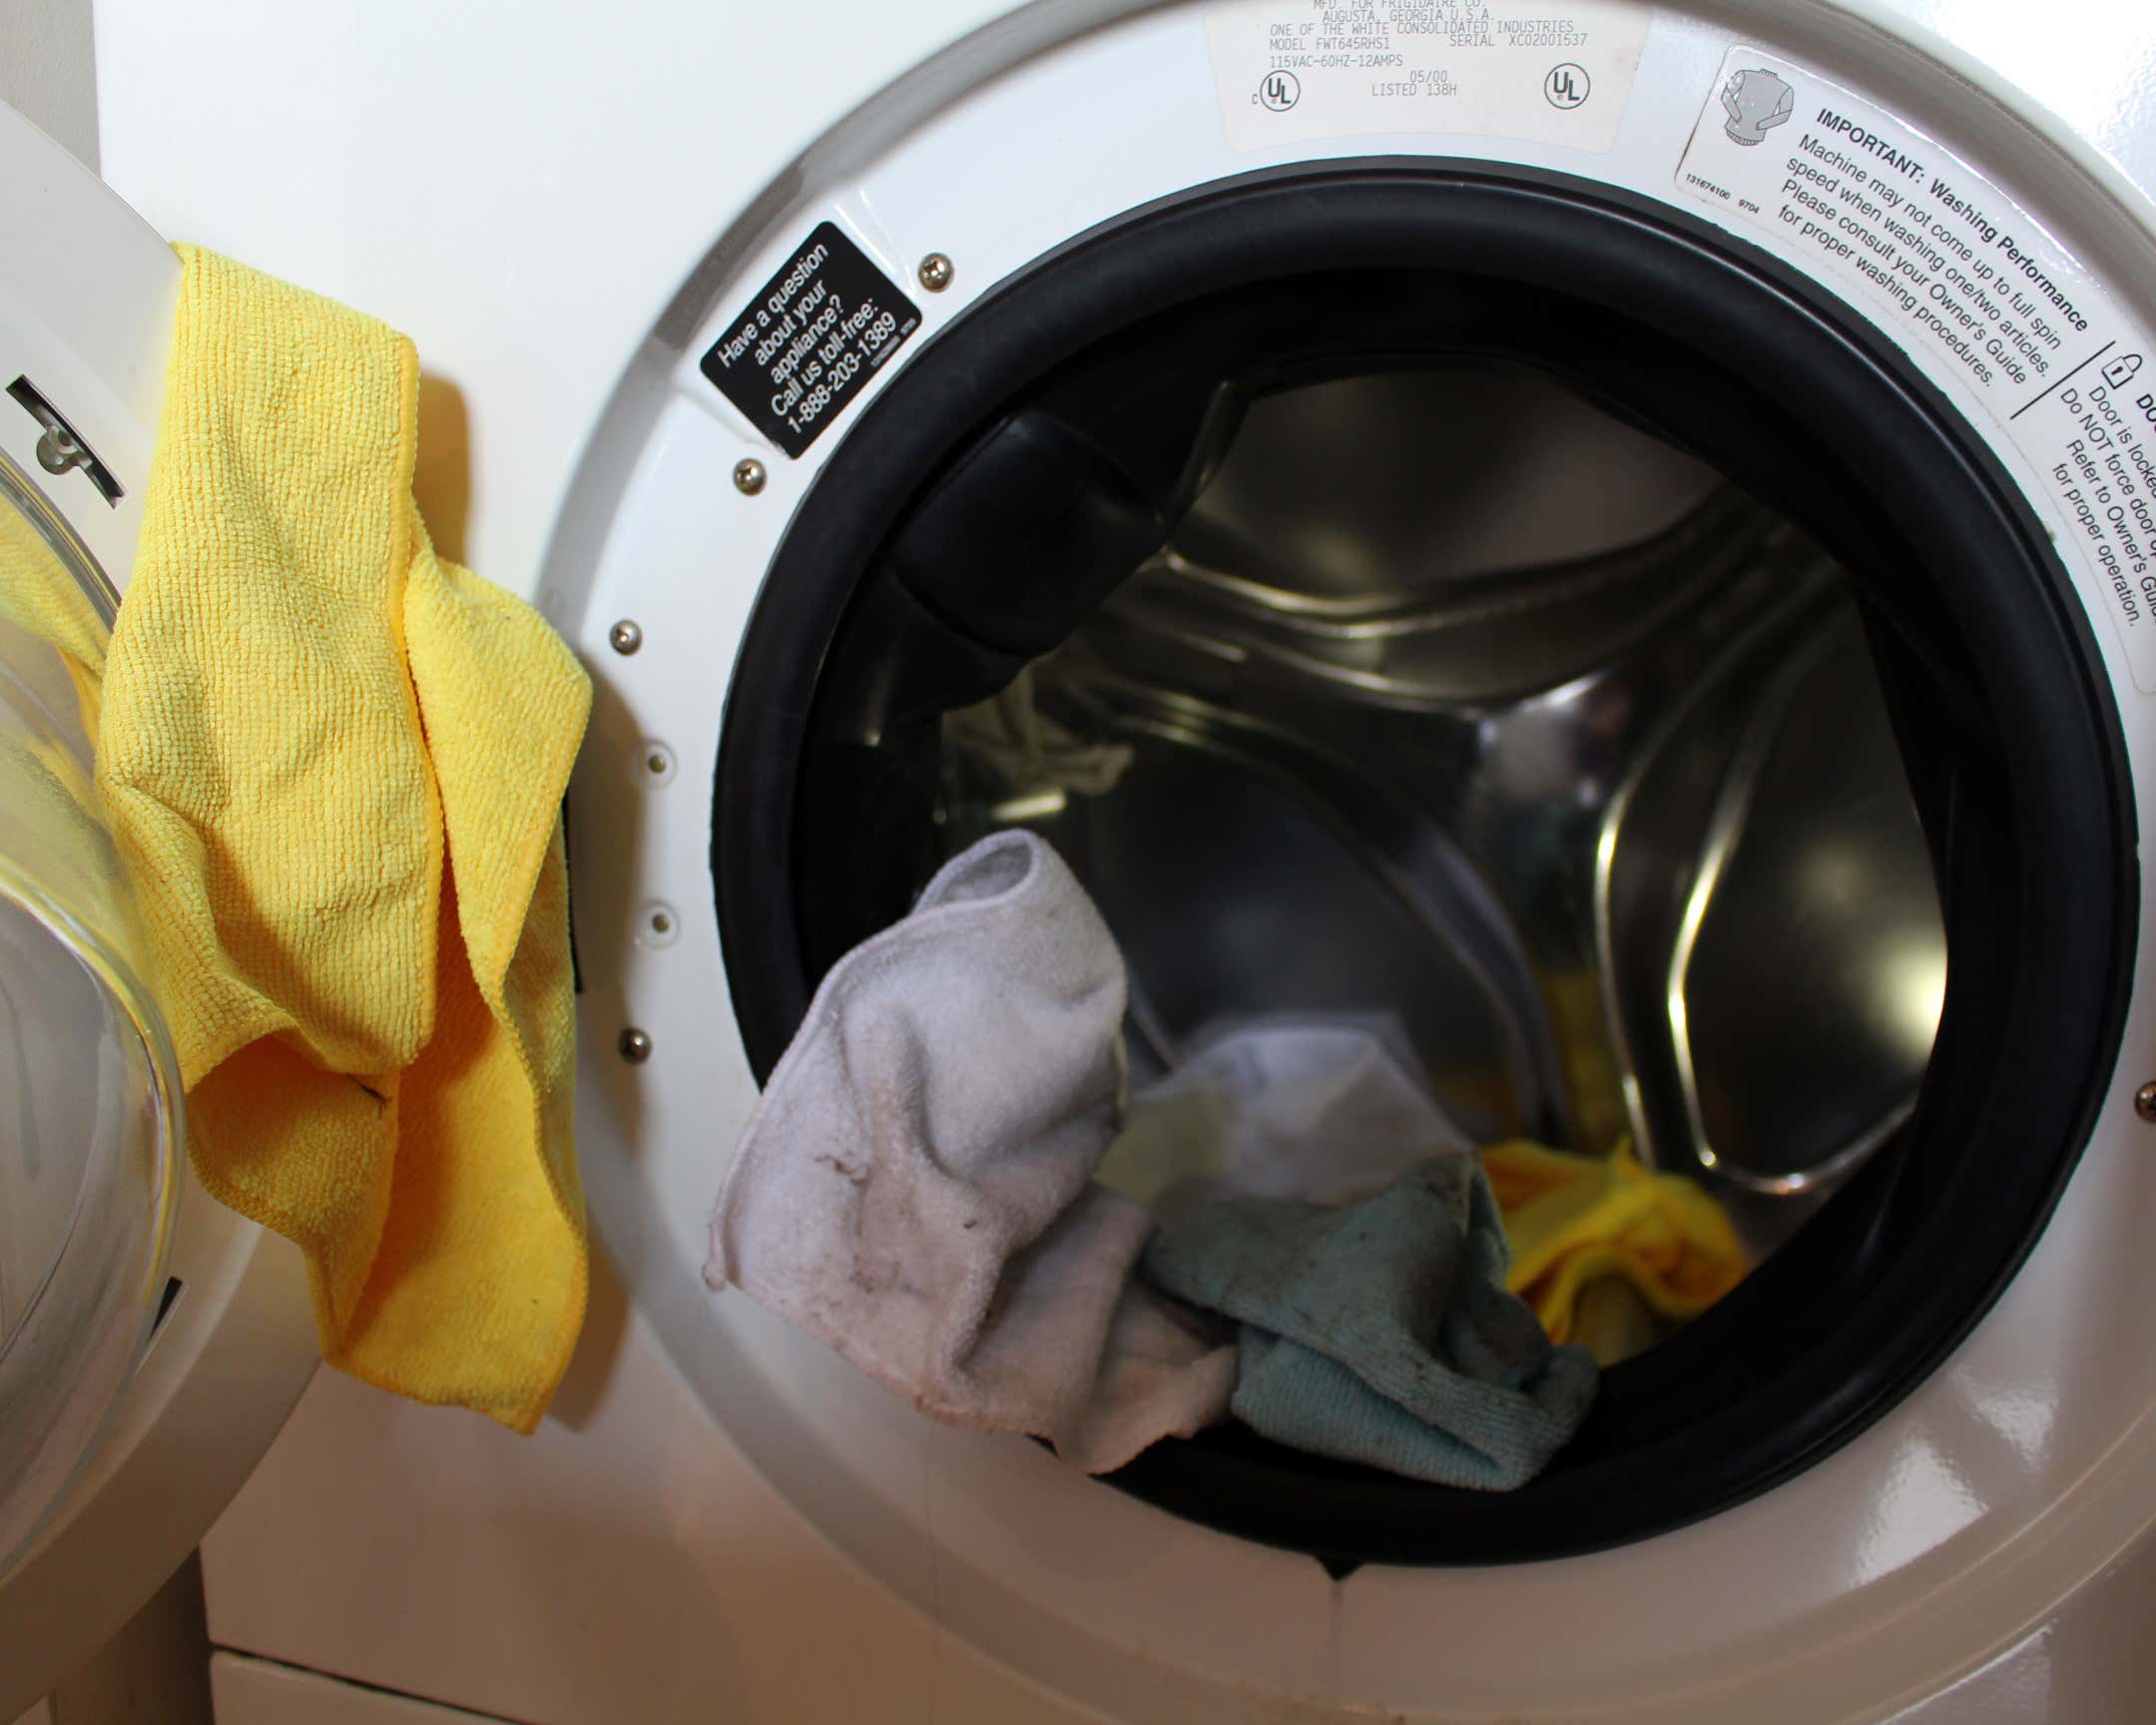 Blue, yellow, and white microfiber towels hanging out of a white front-load washing machine.